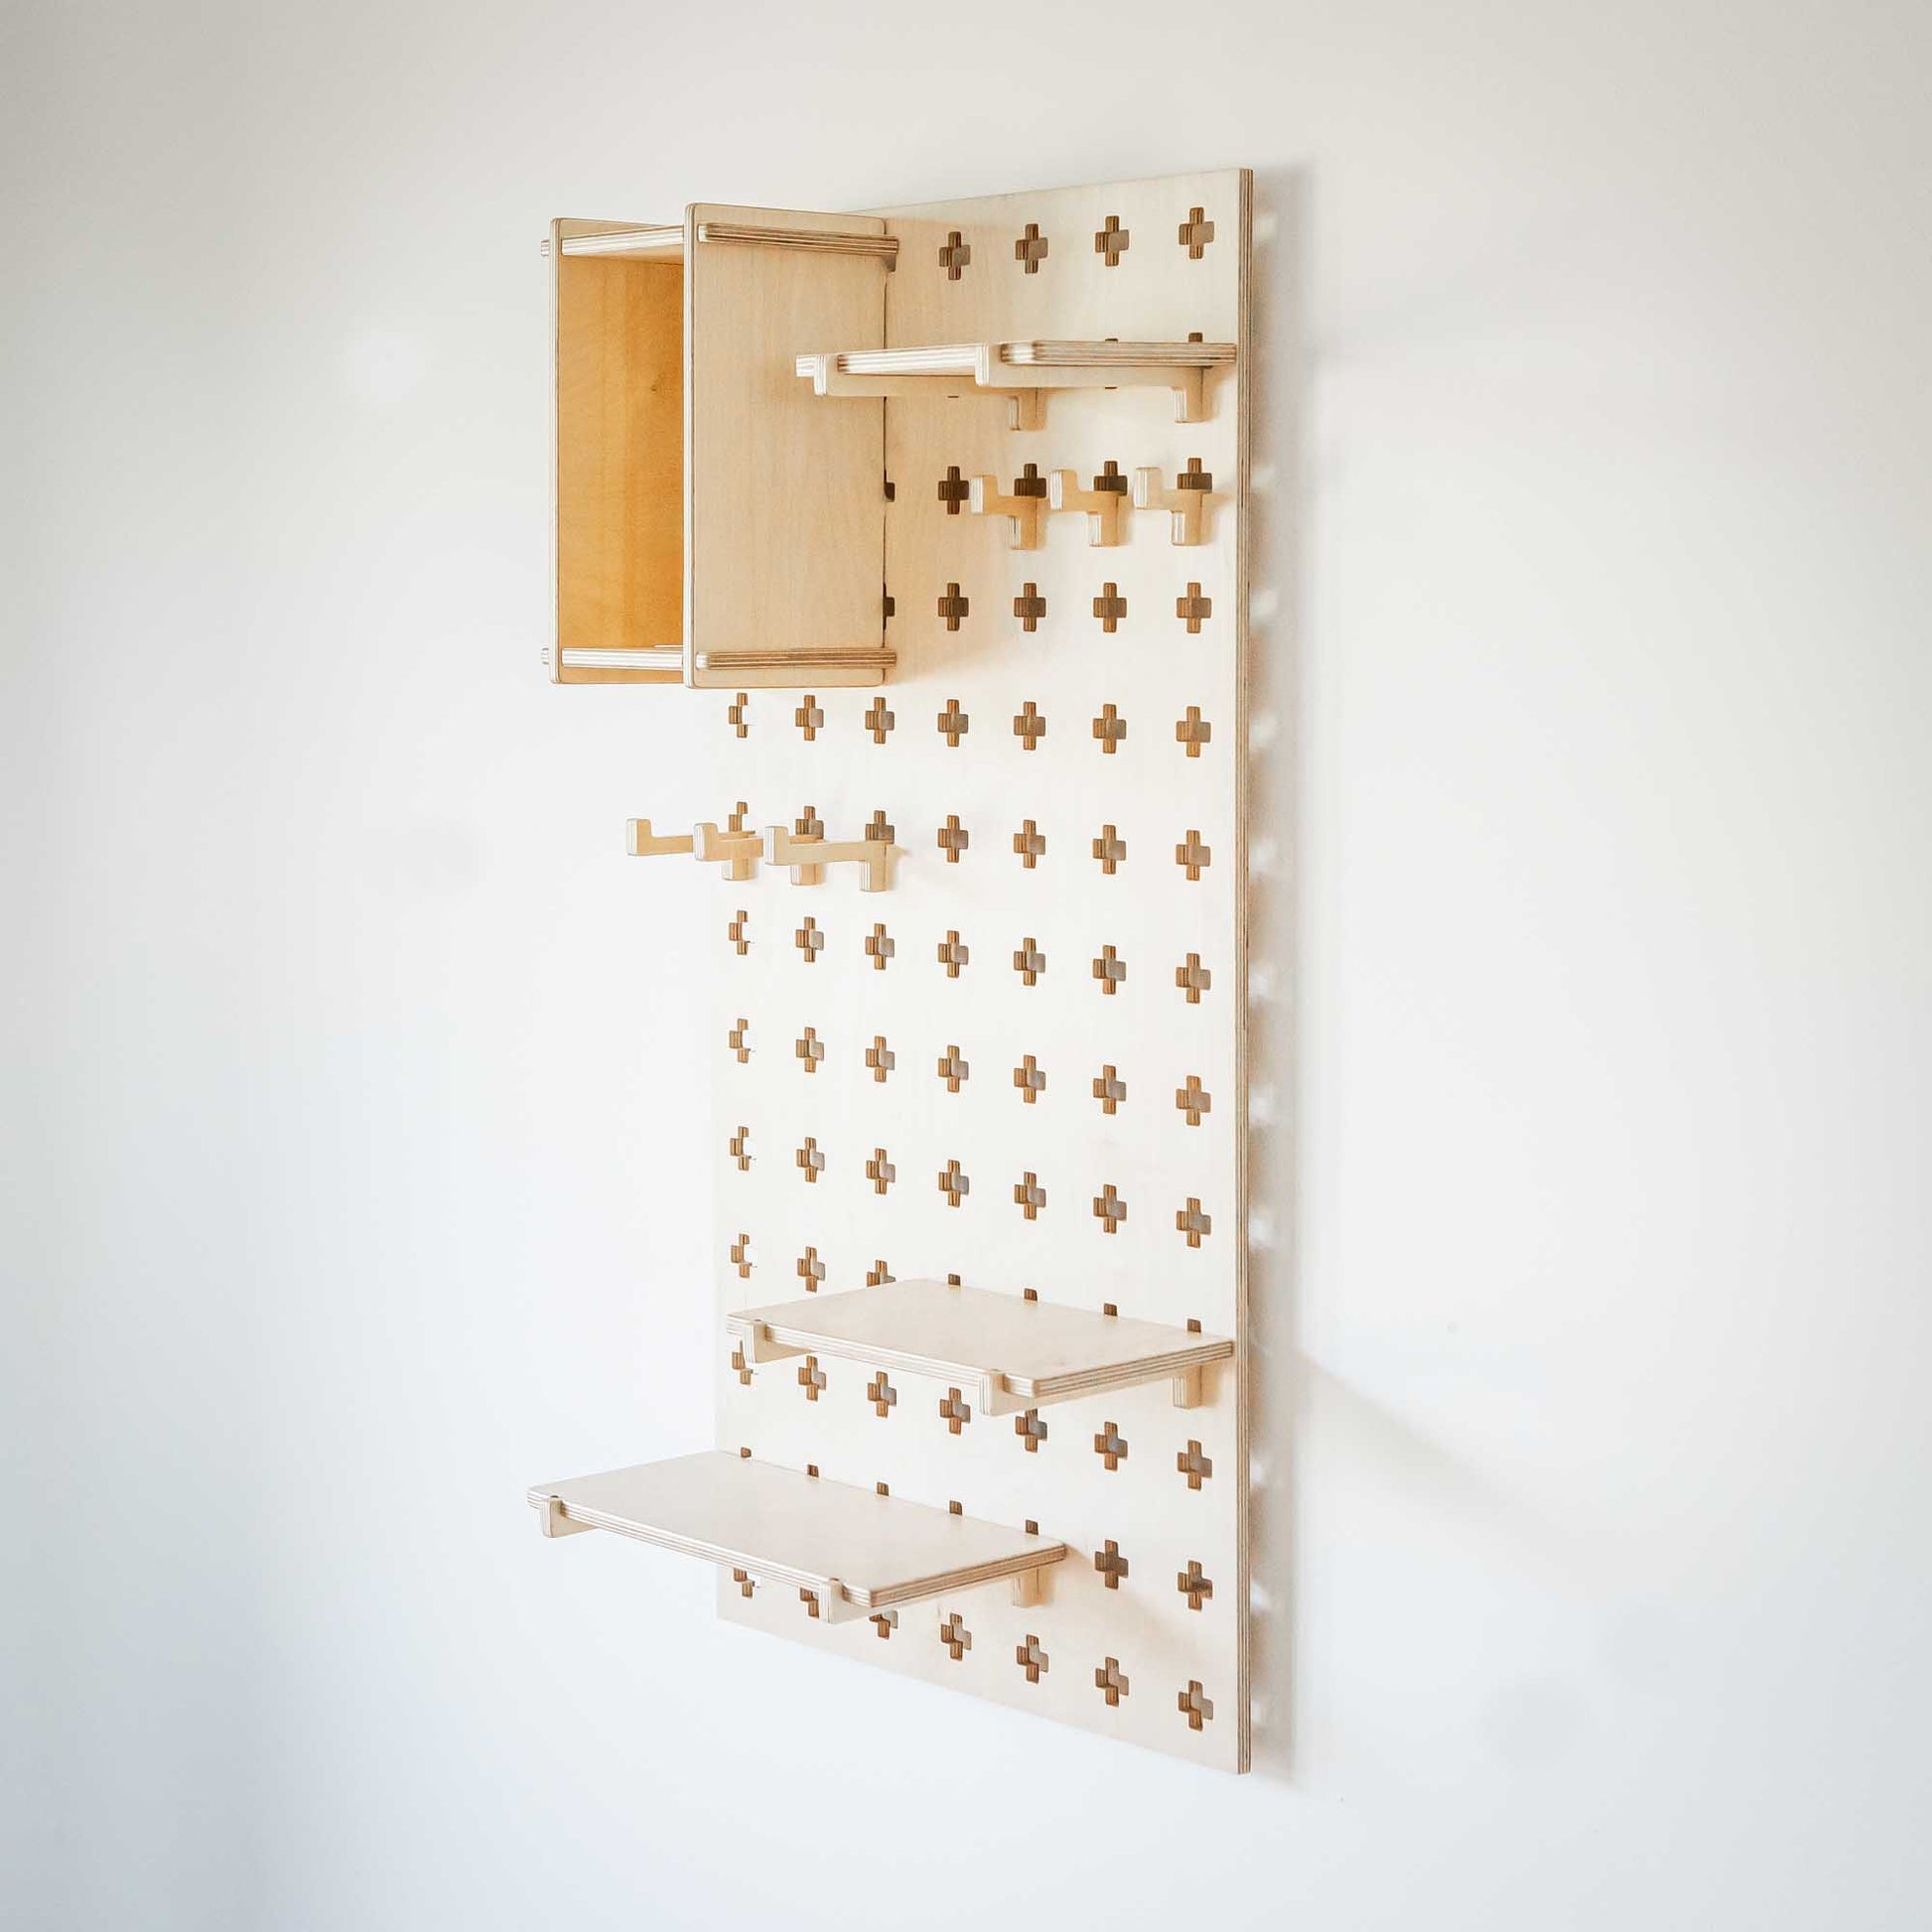 A Floating Shelves Pegboard on a white background providing open storage shelves for all your organizational needs.